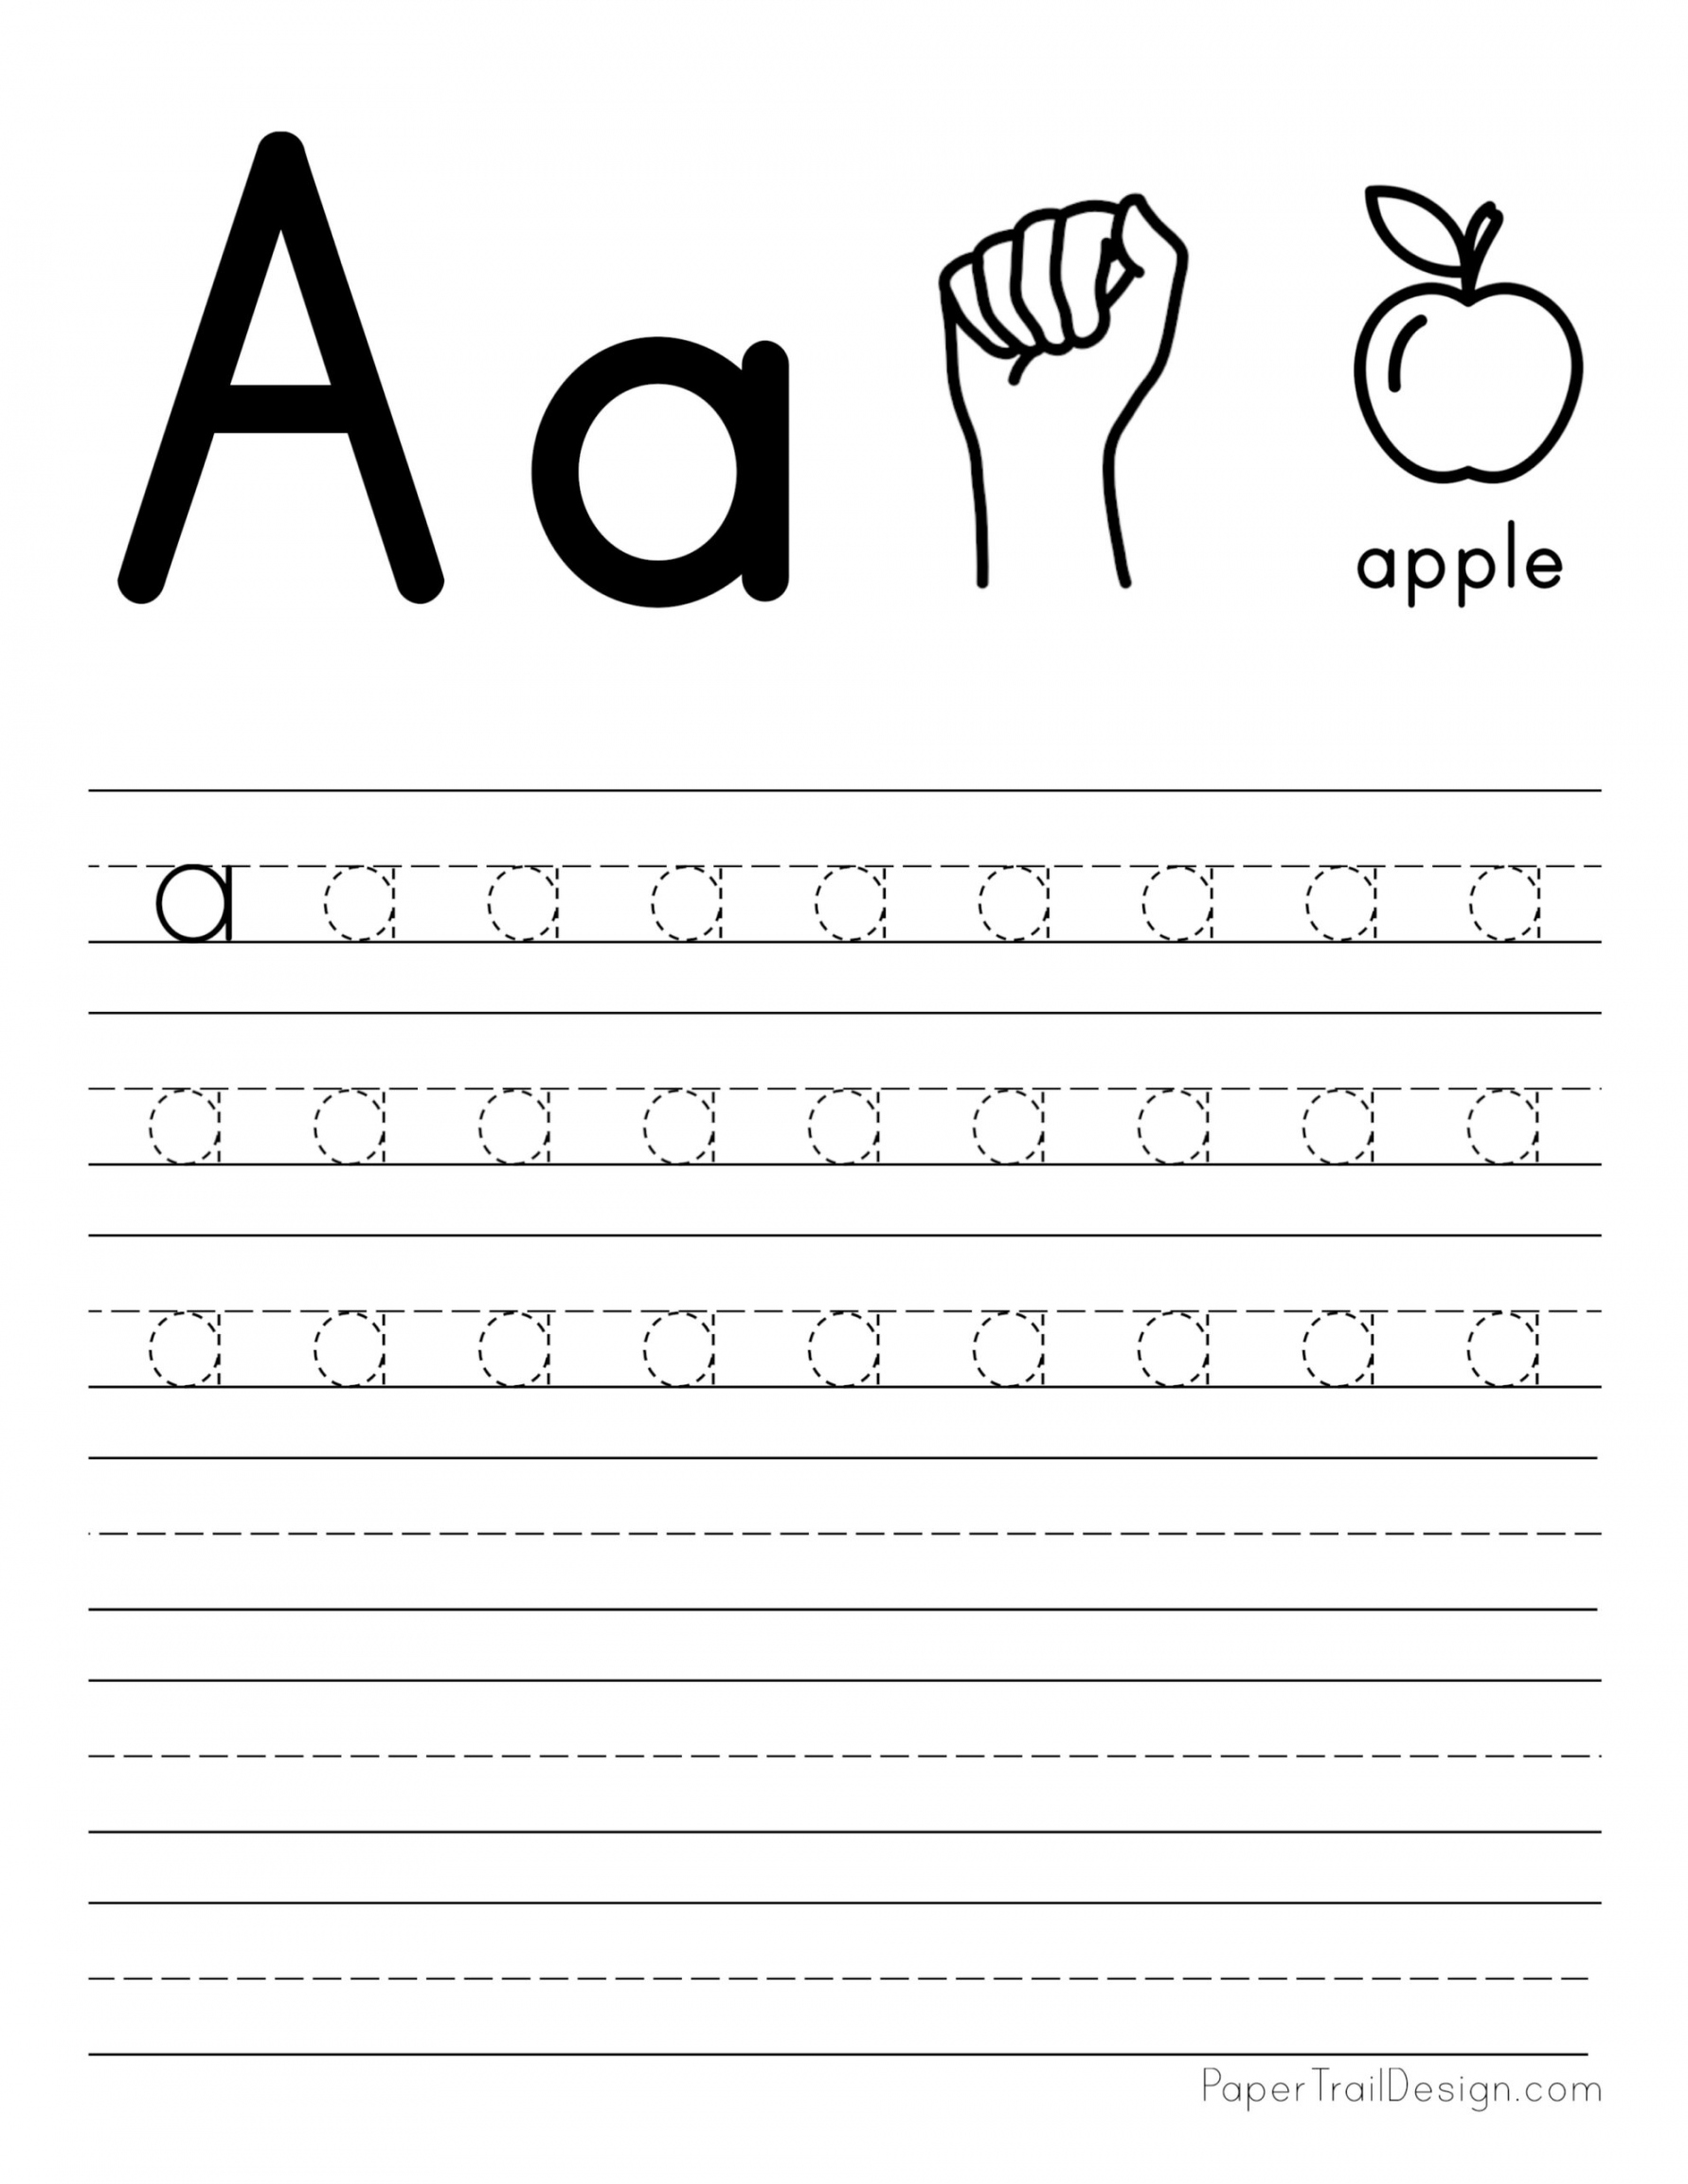 Free Printable Tracing Letters - Printable - Free Letter Tracing Worksheets - Paper Trail Design